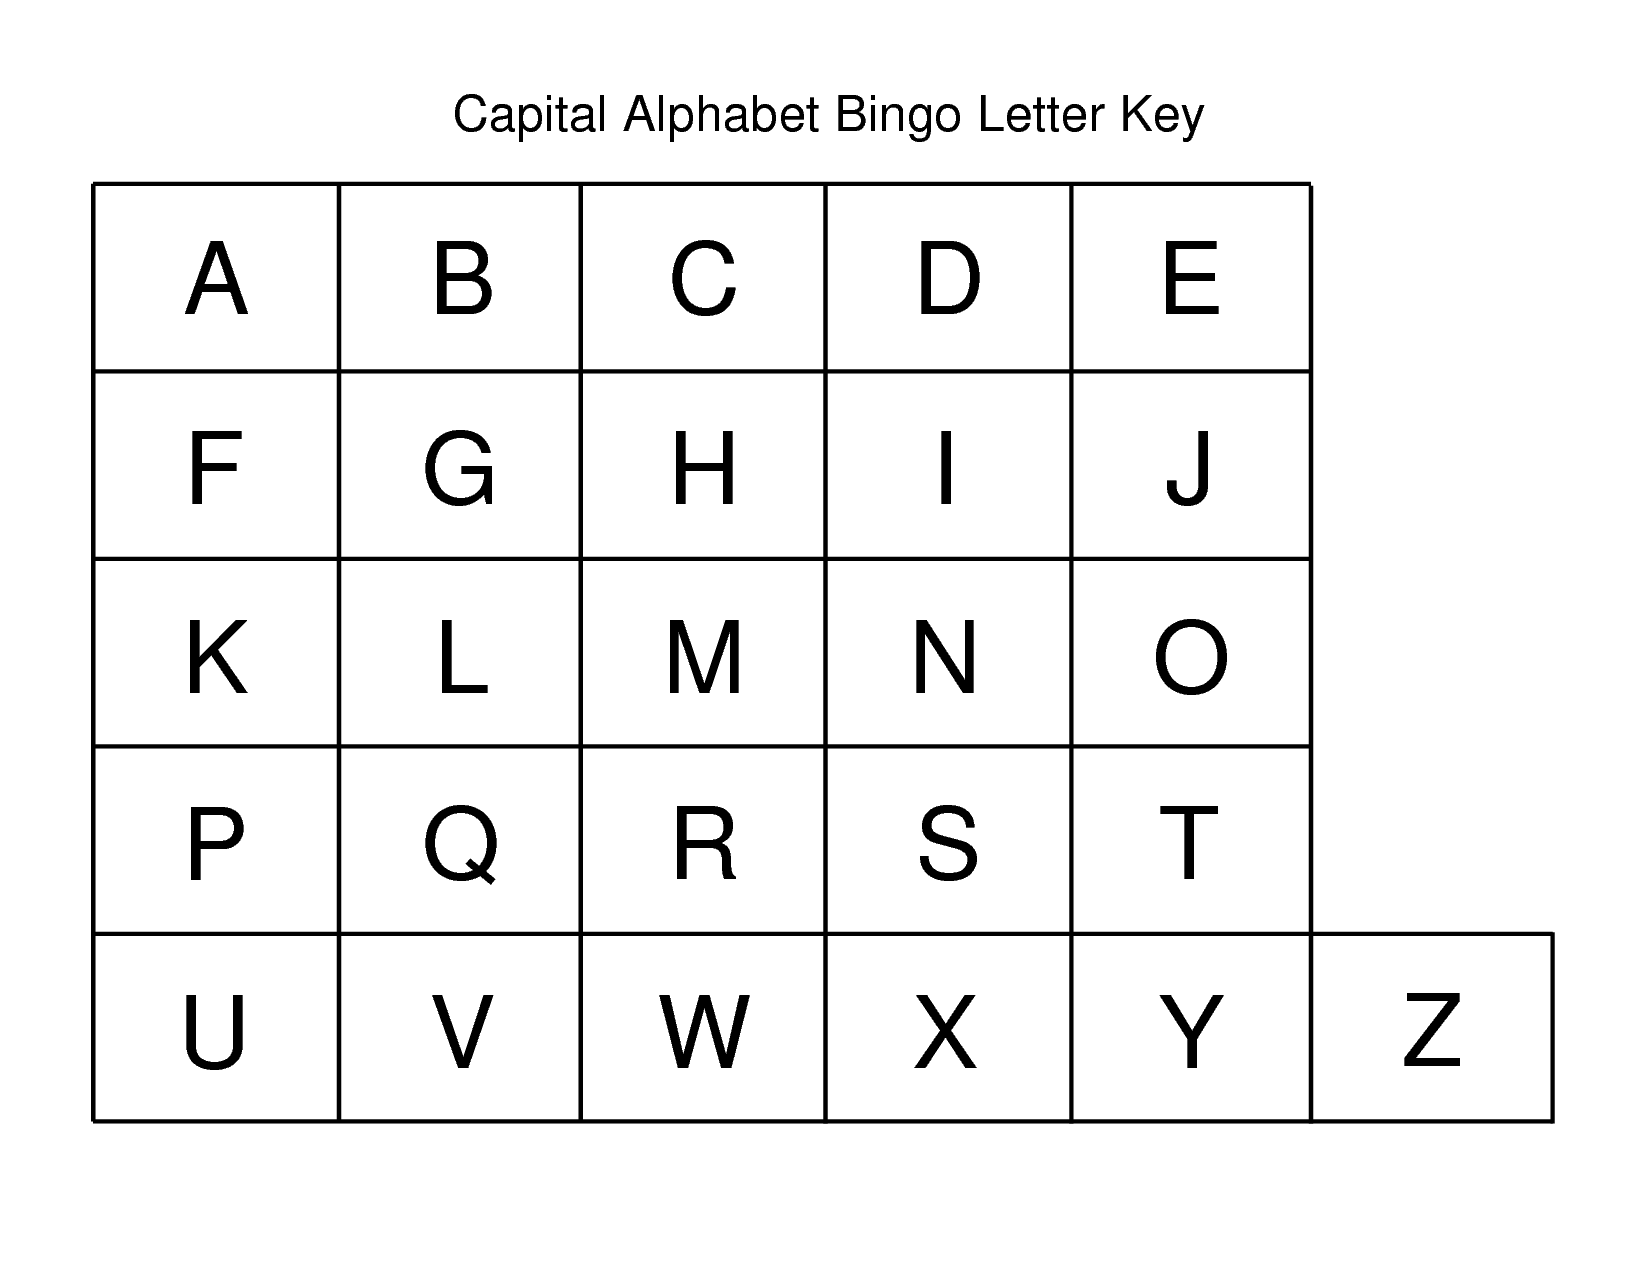 7 Best Images of Printable Alphabet Letters From The Capital